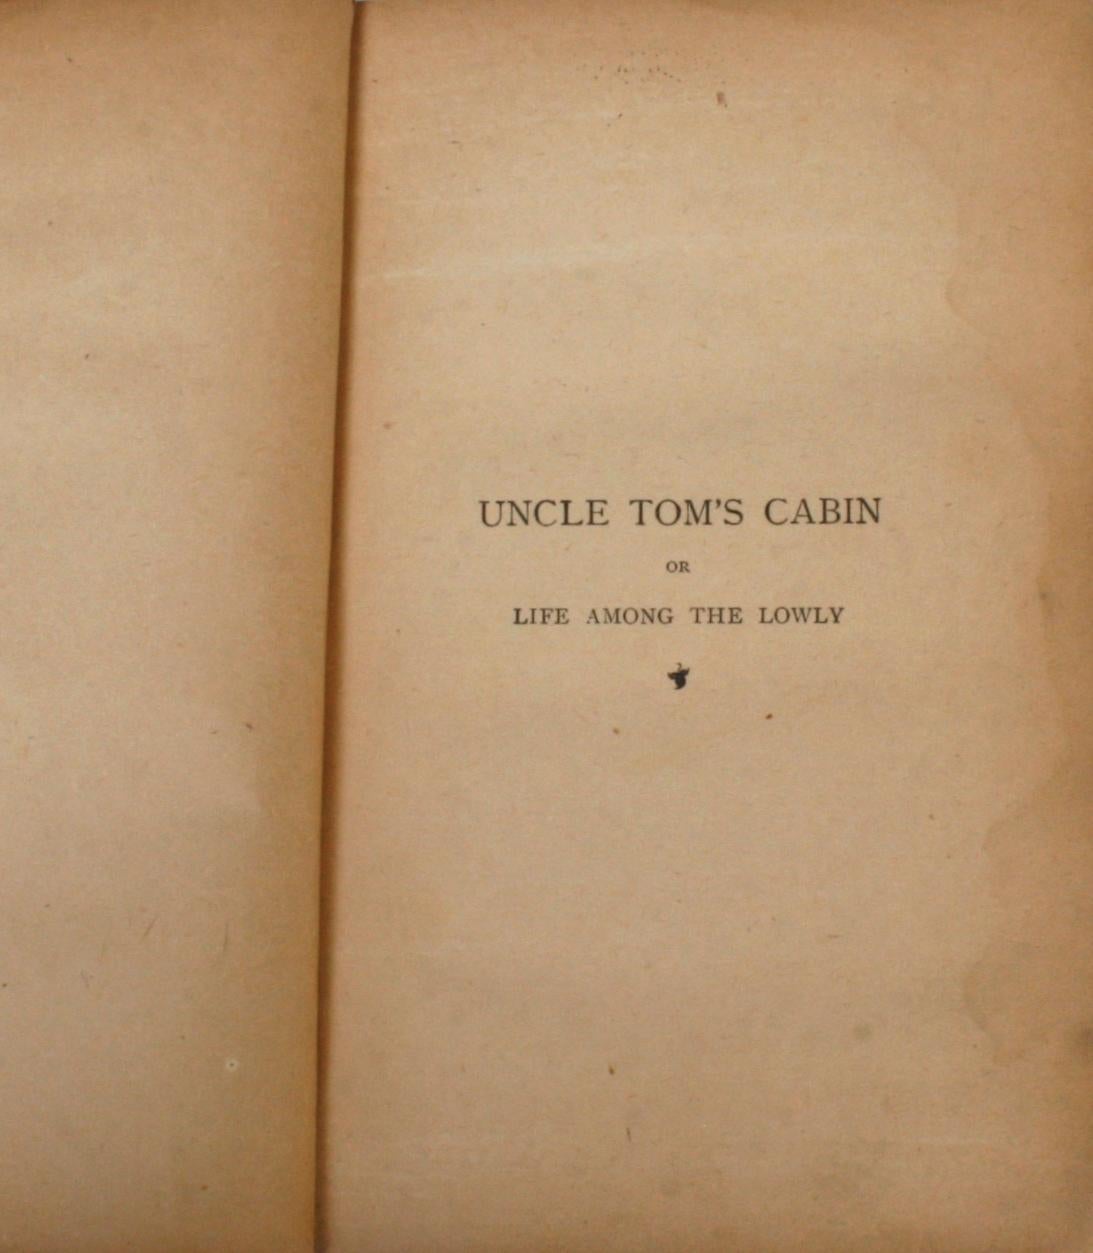 uncle tom's cabin book worth